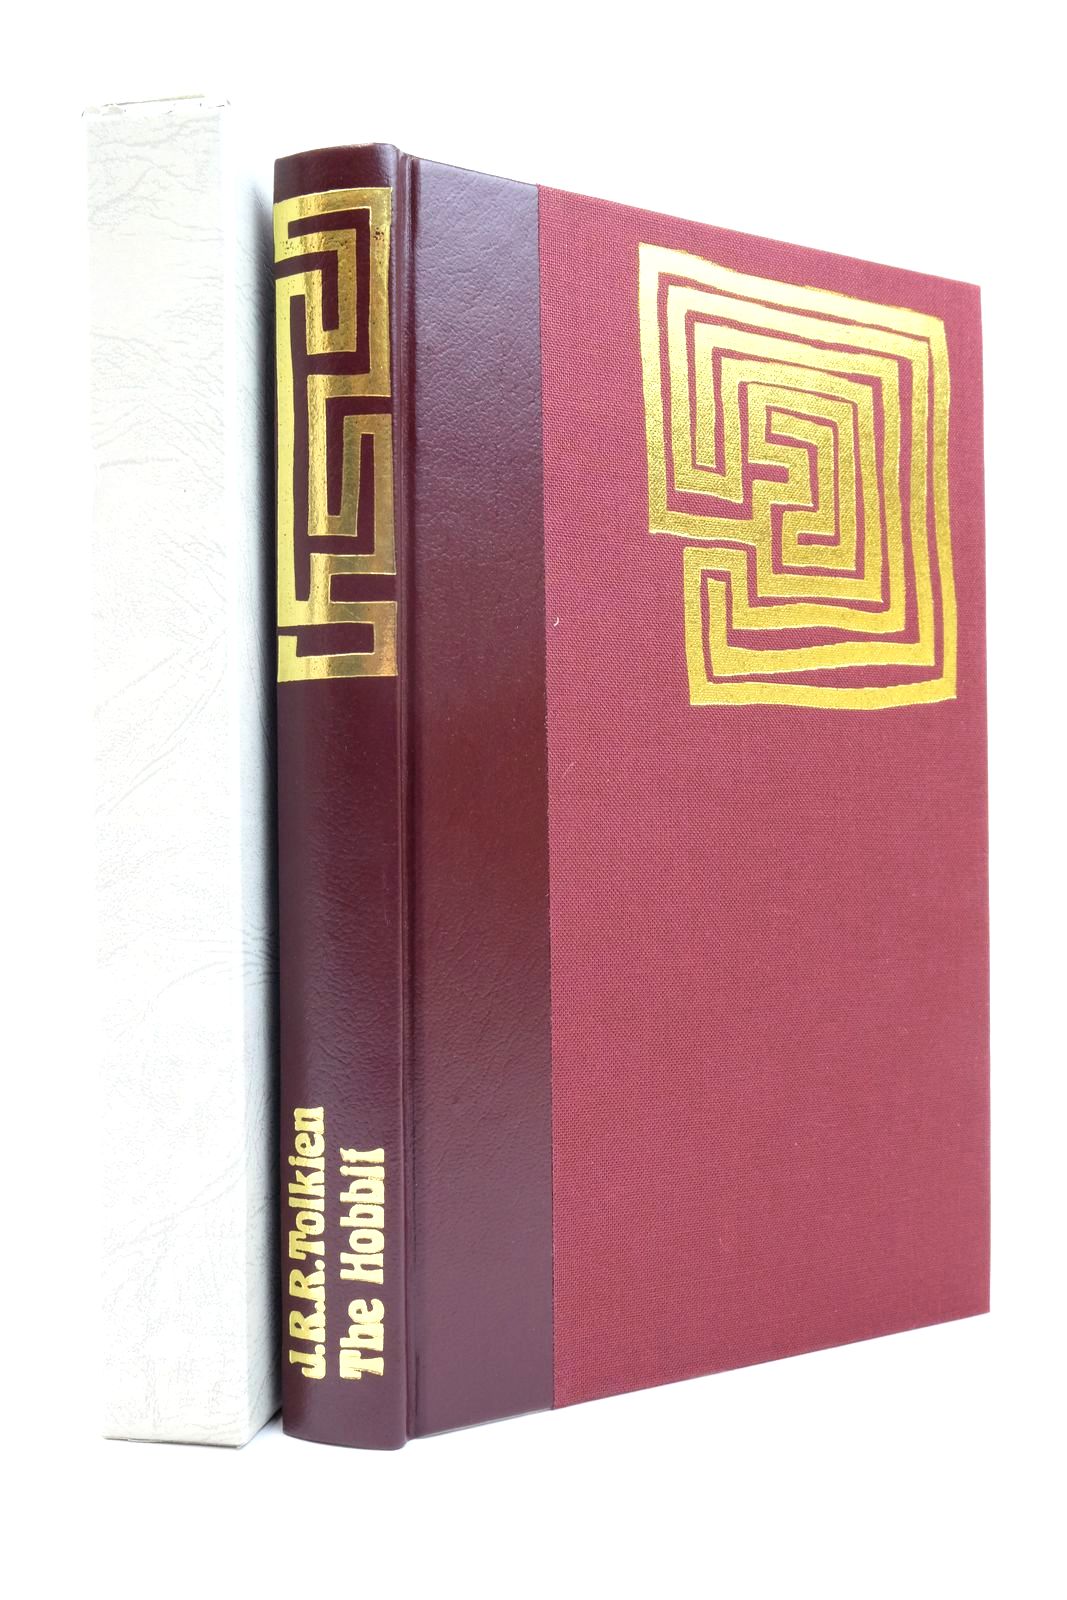 Photo of THE HOBBIT OR THERE AND BACK AGAIN written by Tolkien, J.R.R. illustrated by Fraser, Eric published by Folio Society (STOCK CODE: 2138401)  for sale by Stella & Rose's Books